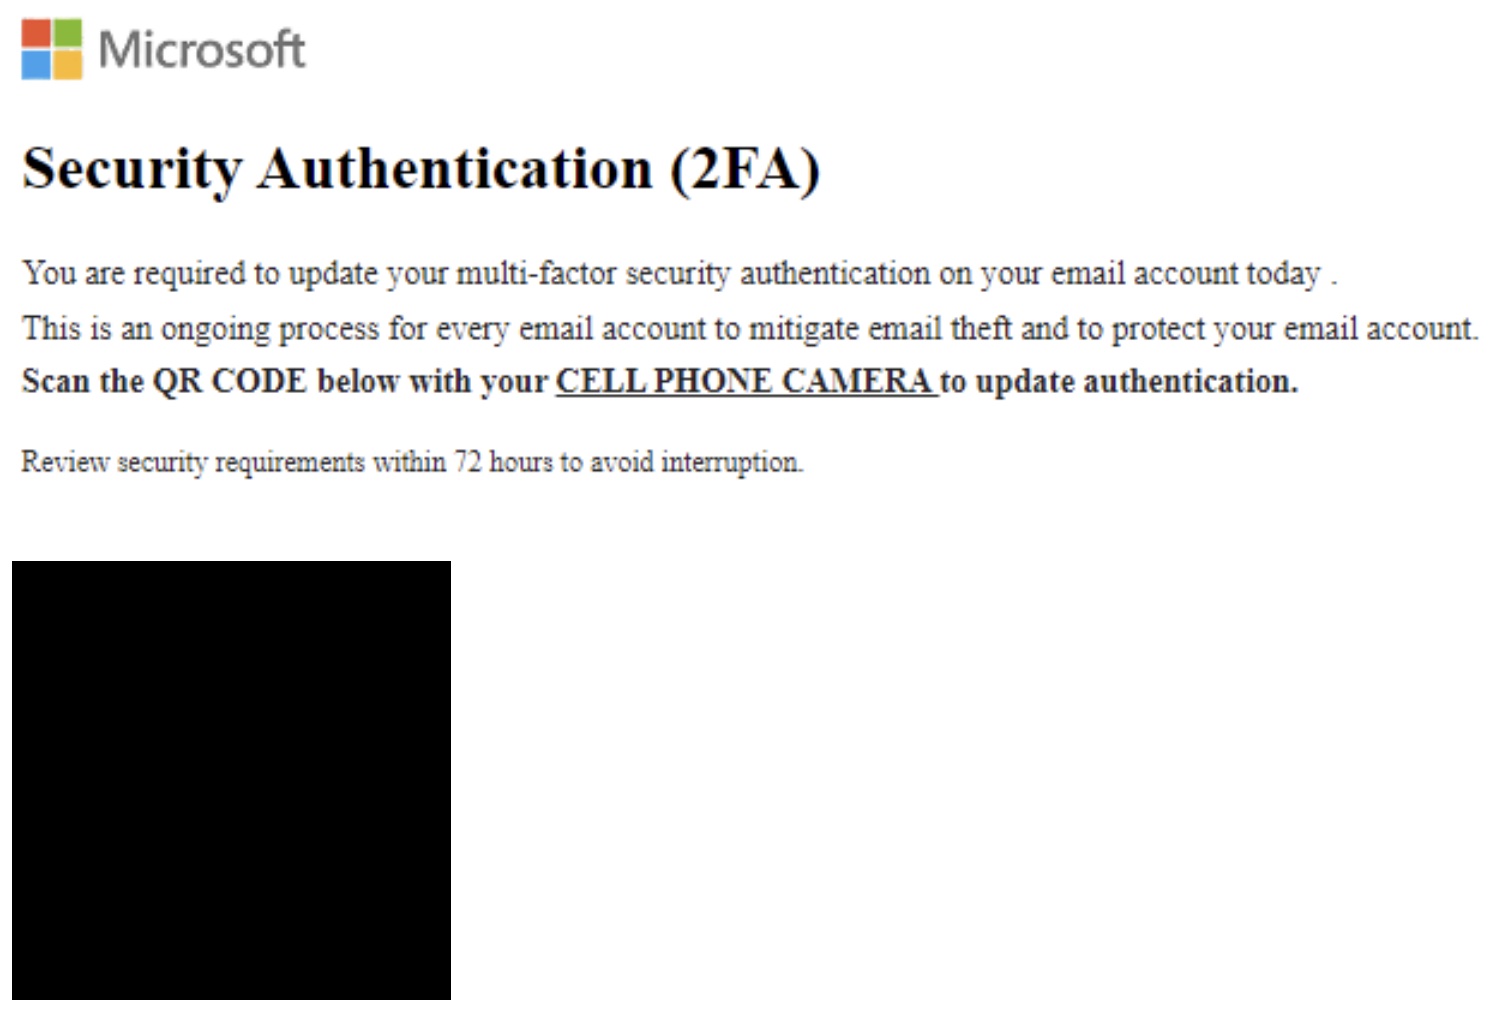 A fake Microsoft-branded notification with the heading "Security Authentication (2FA)" directing the recipient to scan a QR code to update their password.